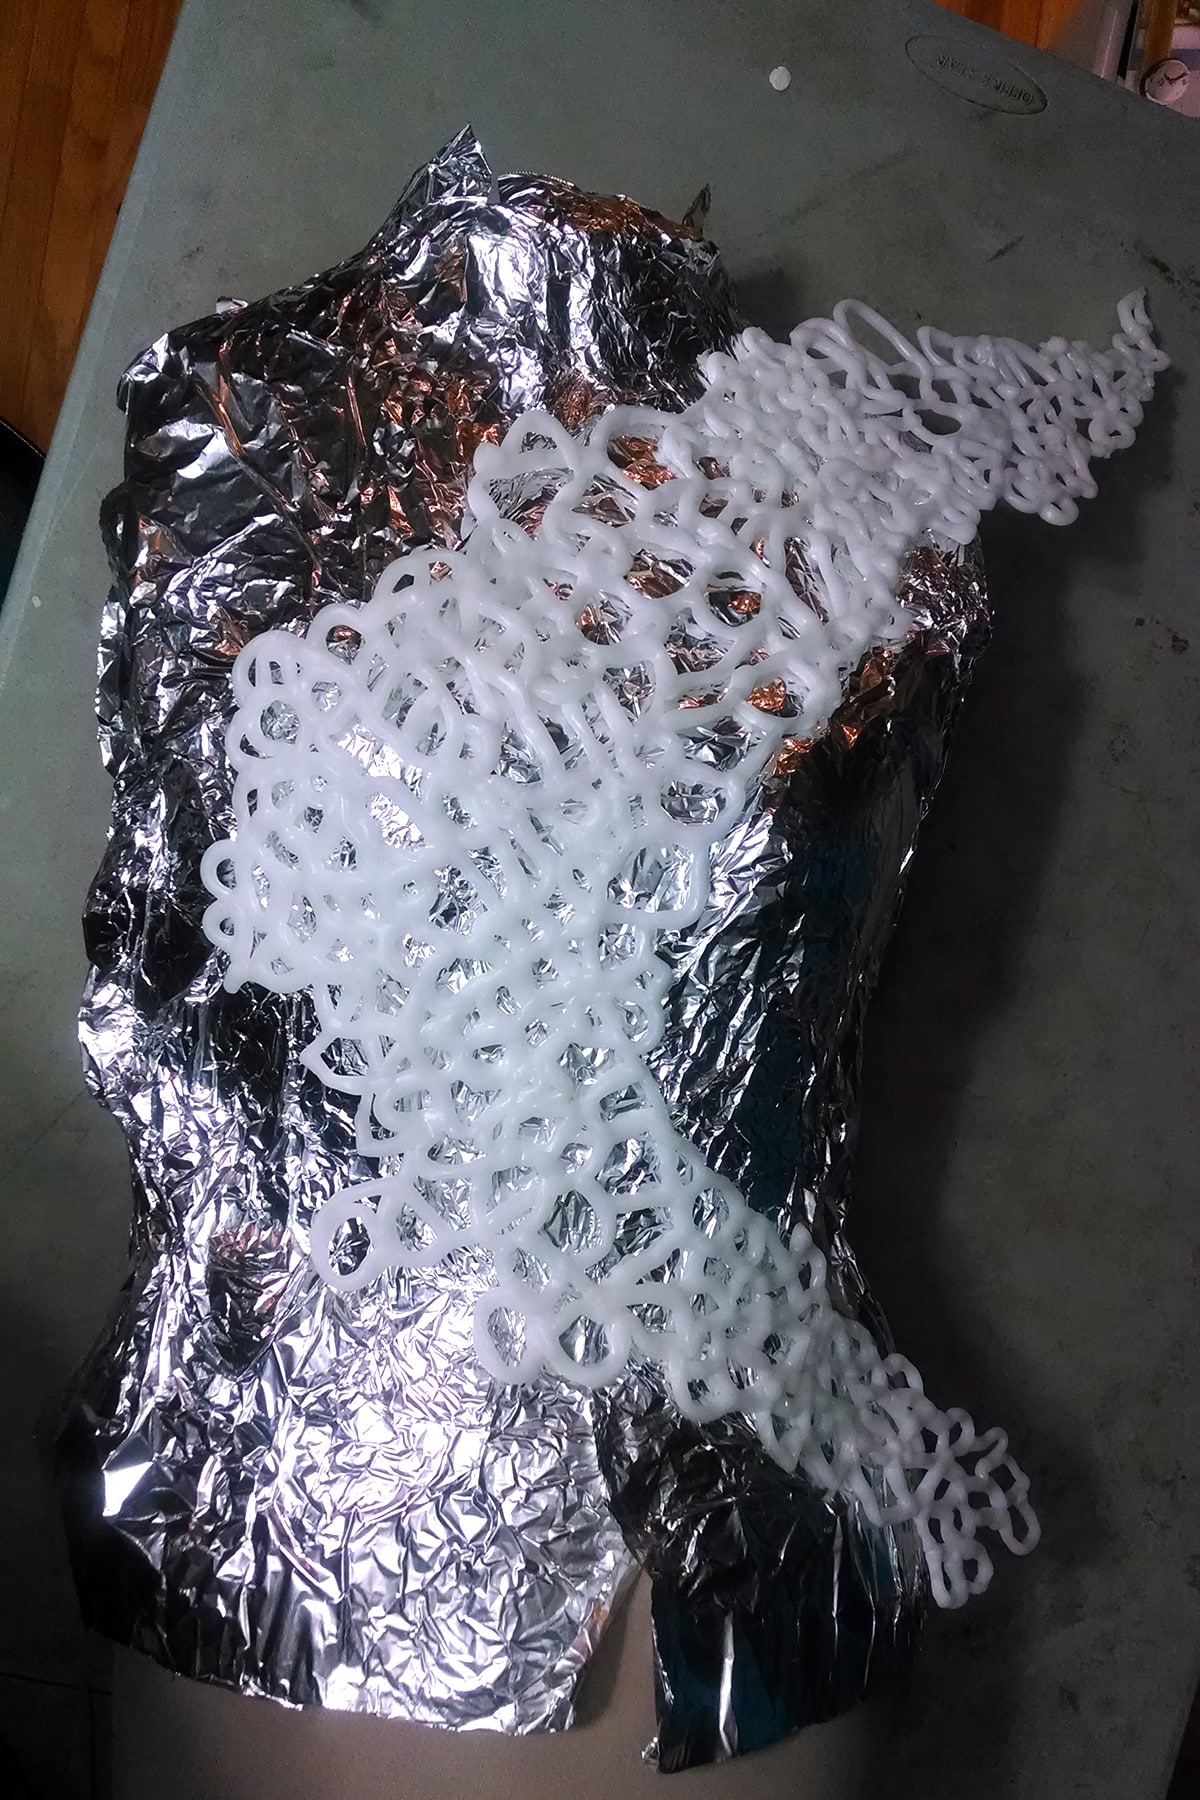 The large front piece of thermoplastic wing is being molded over a dress form covered in foil.